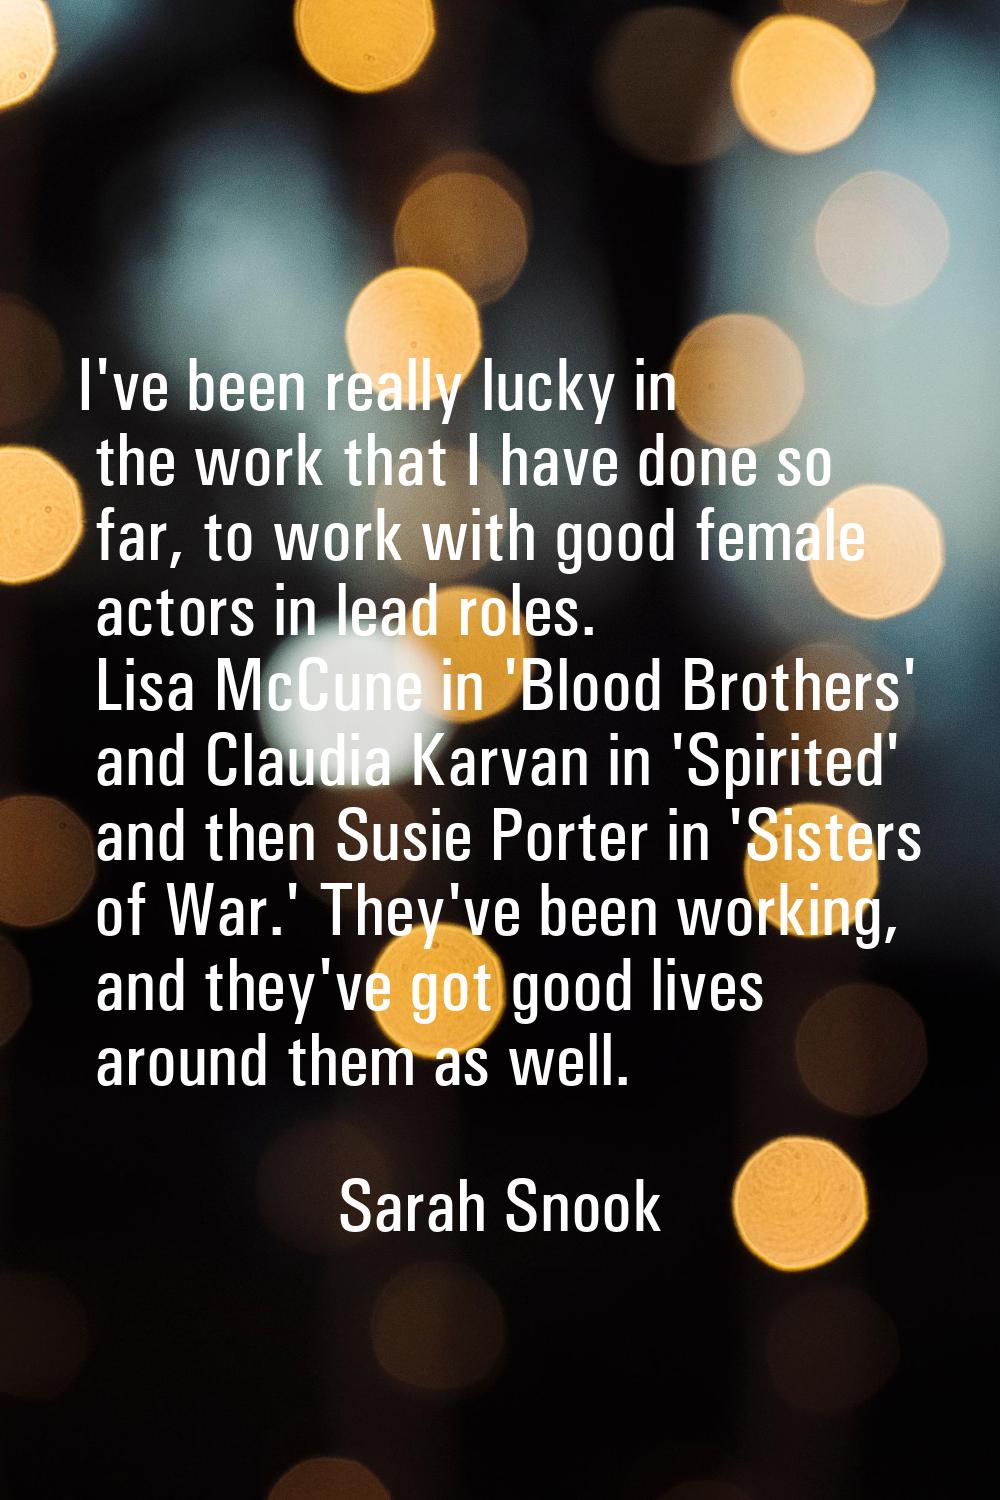 I've been really lucky in the work that I have done so far, to work with good female actors in lead